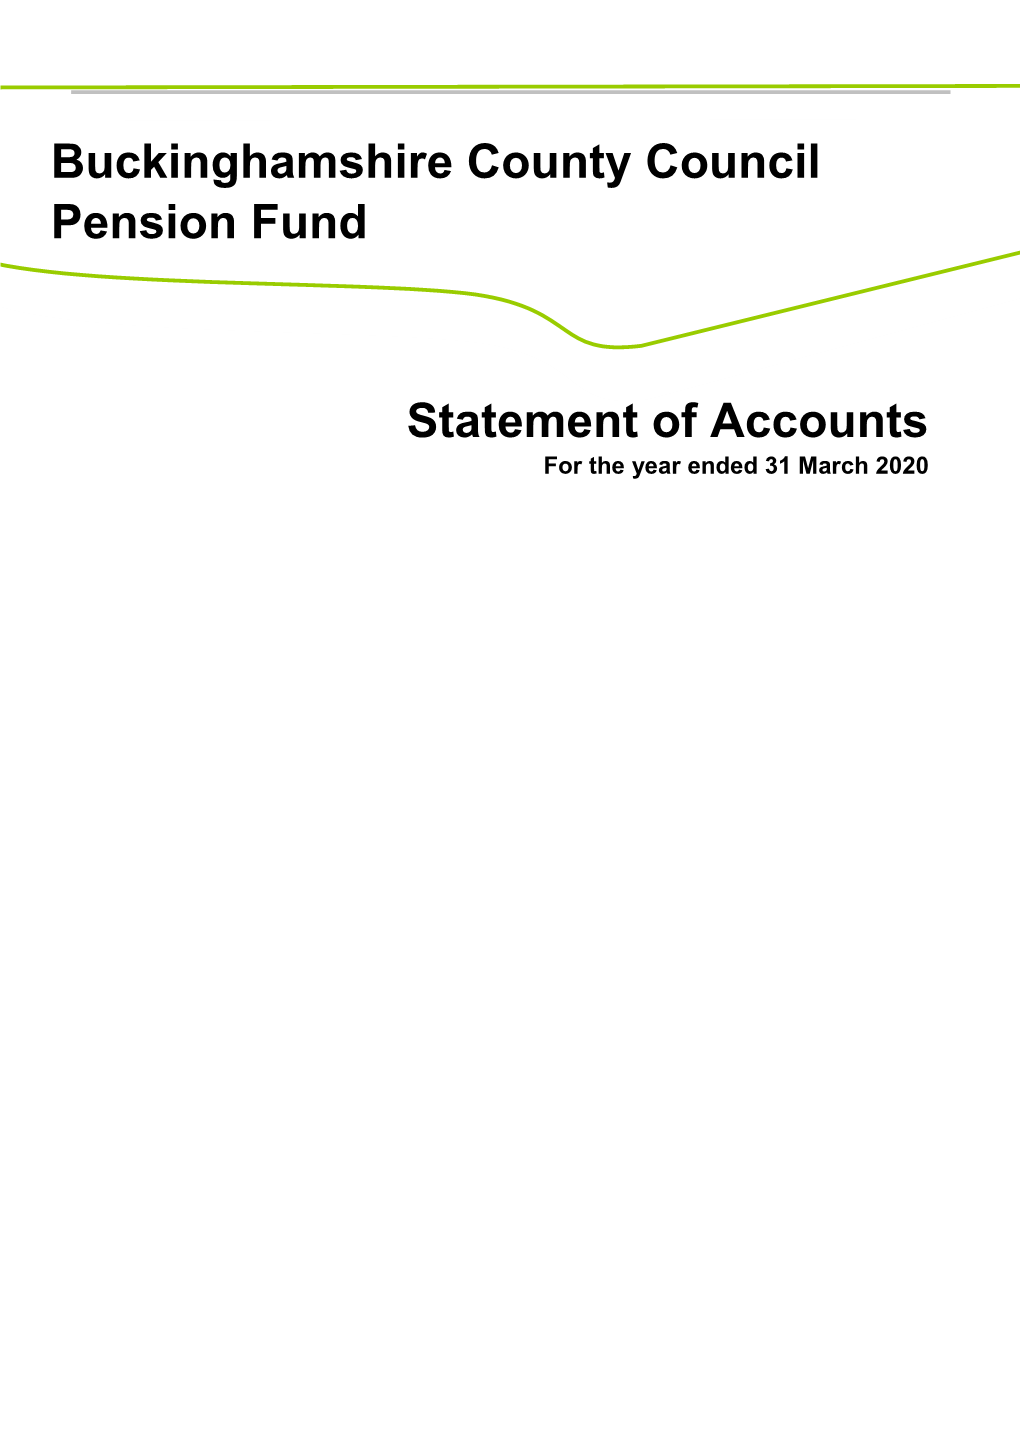 Buckinghamshire County Council Pension Fund Statement of Accounts